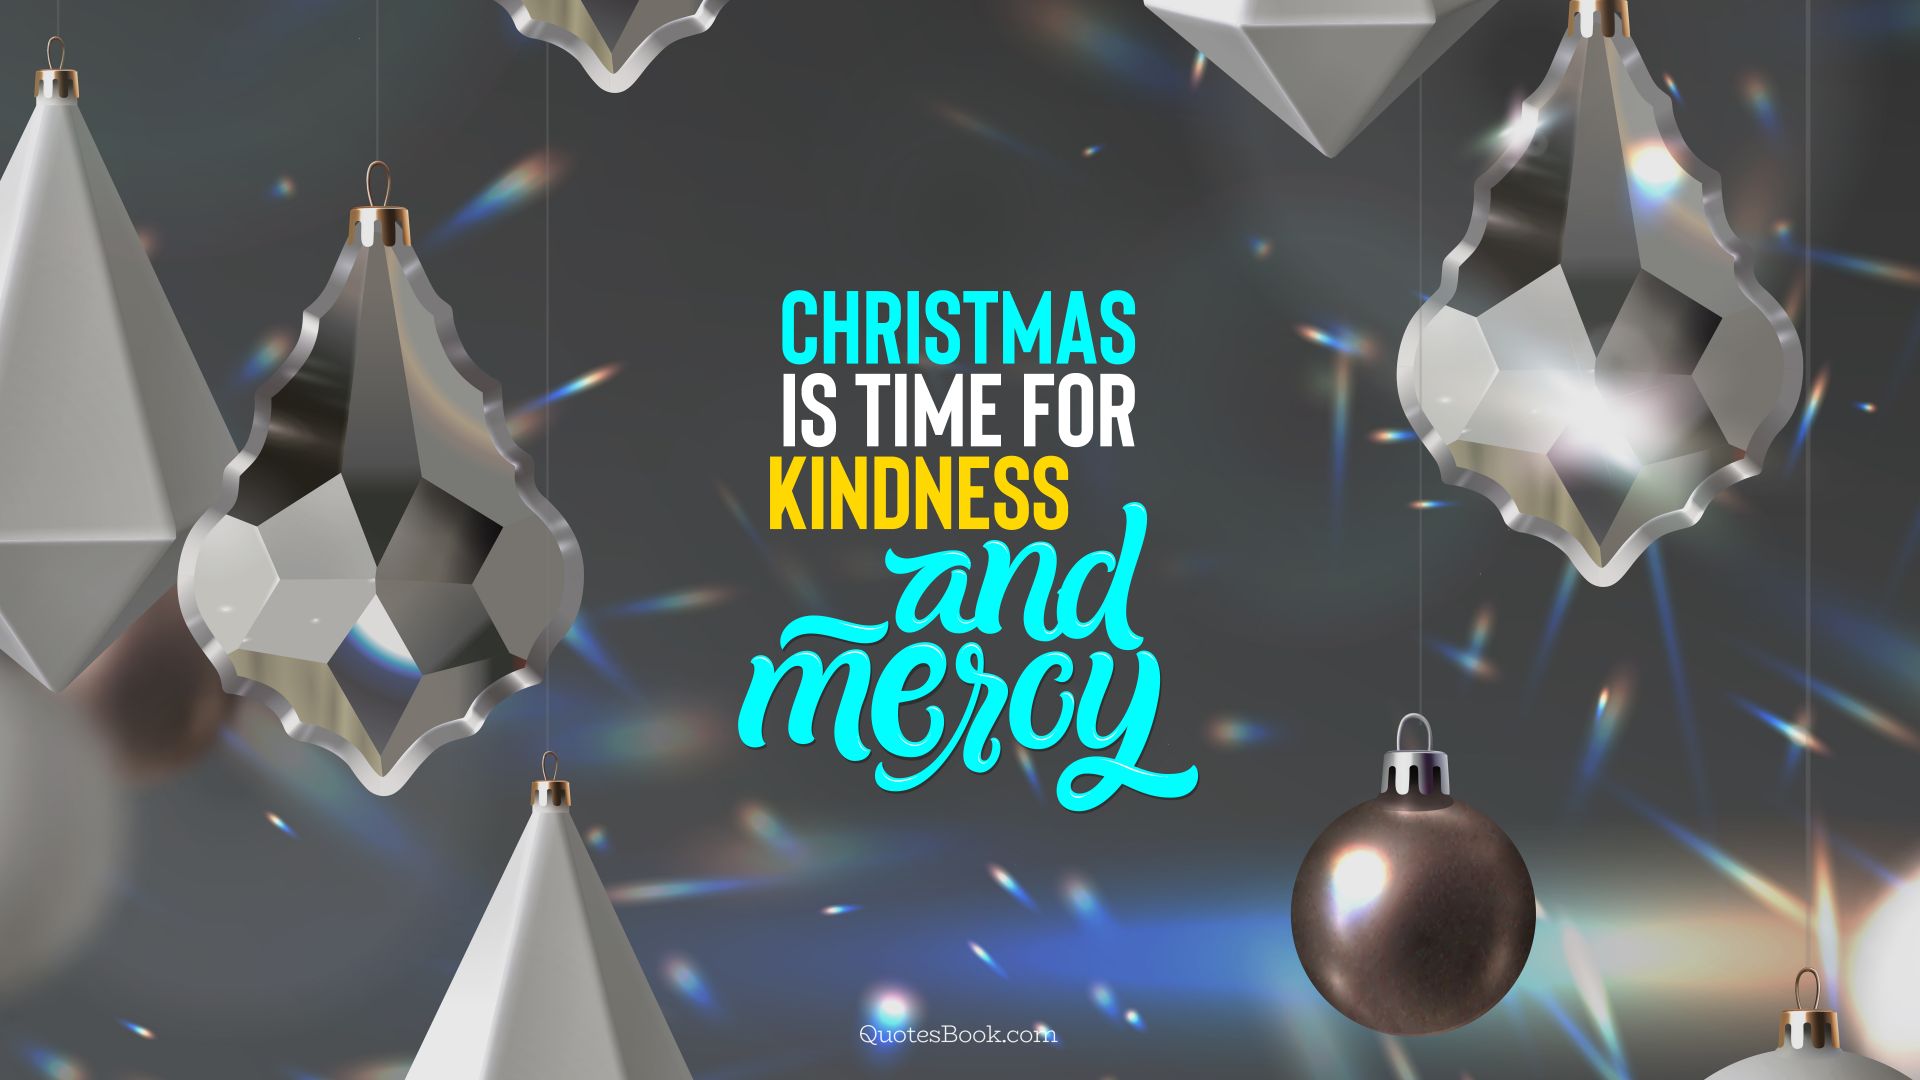 Christmas is time for kindness and mercy. - Quote by QuotesBook